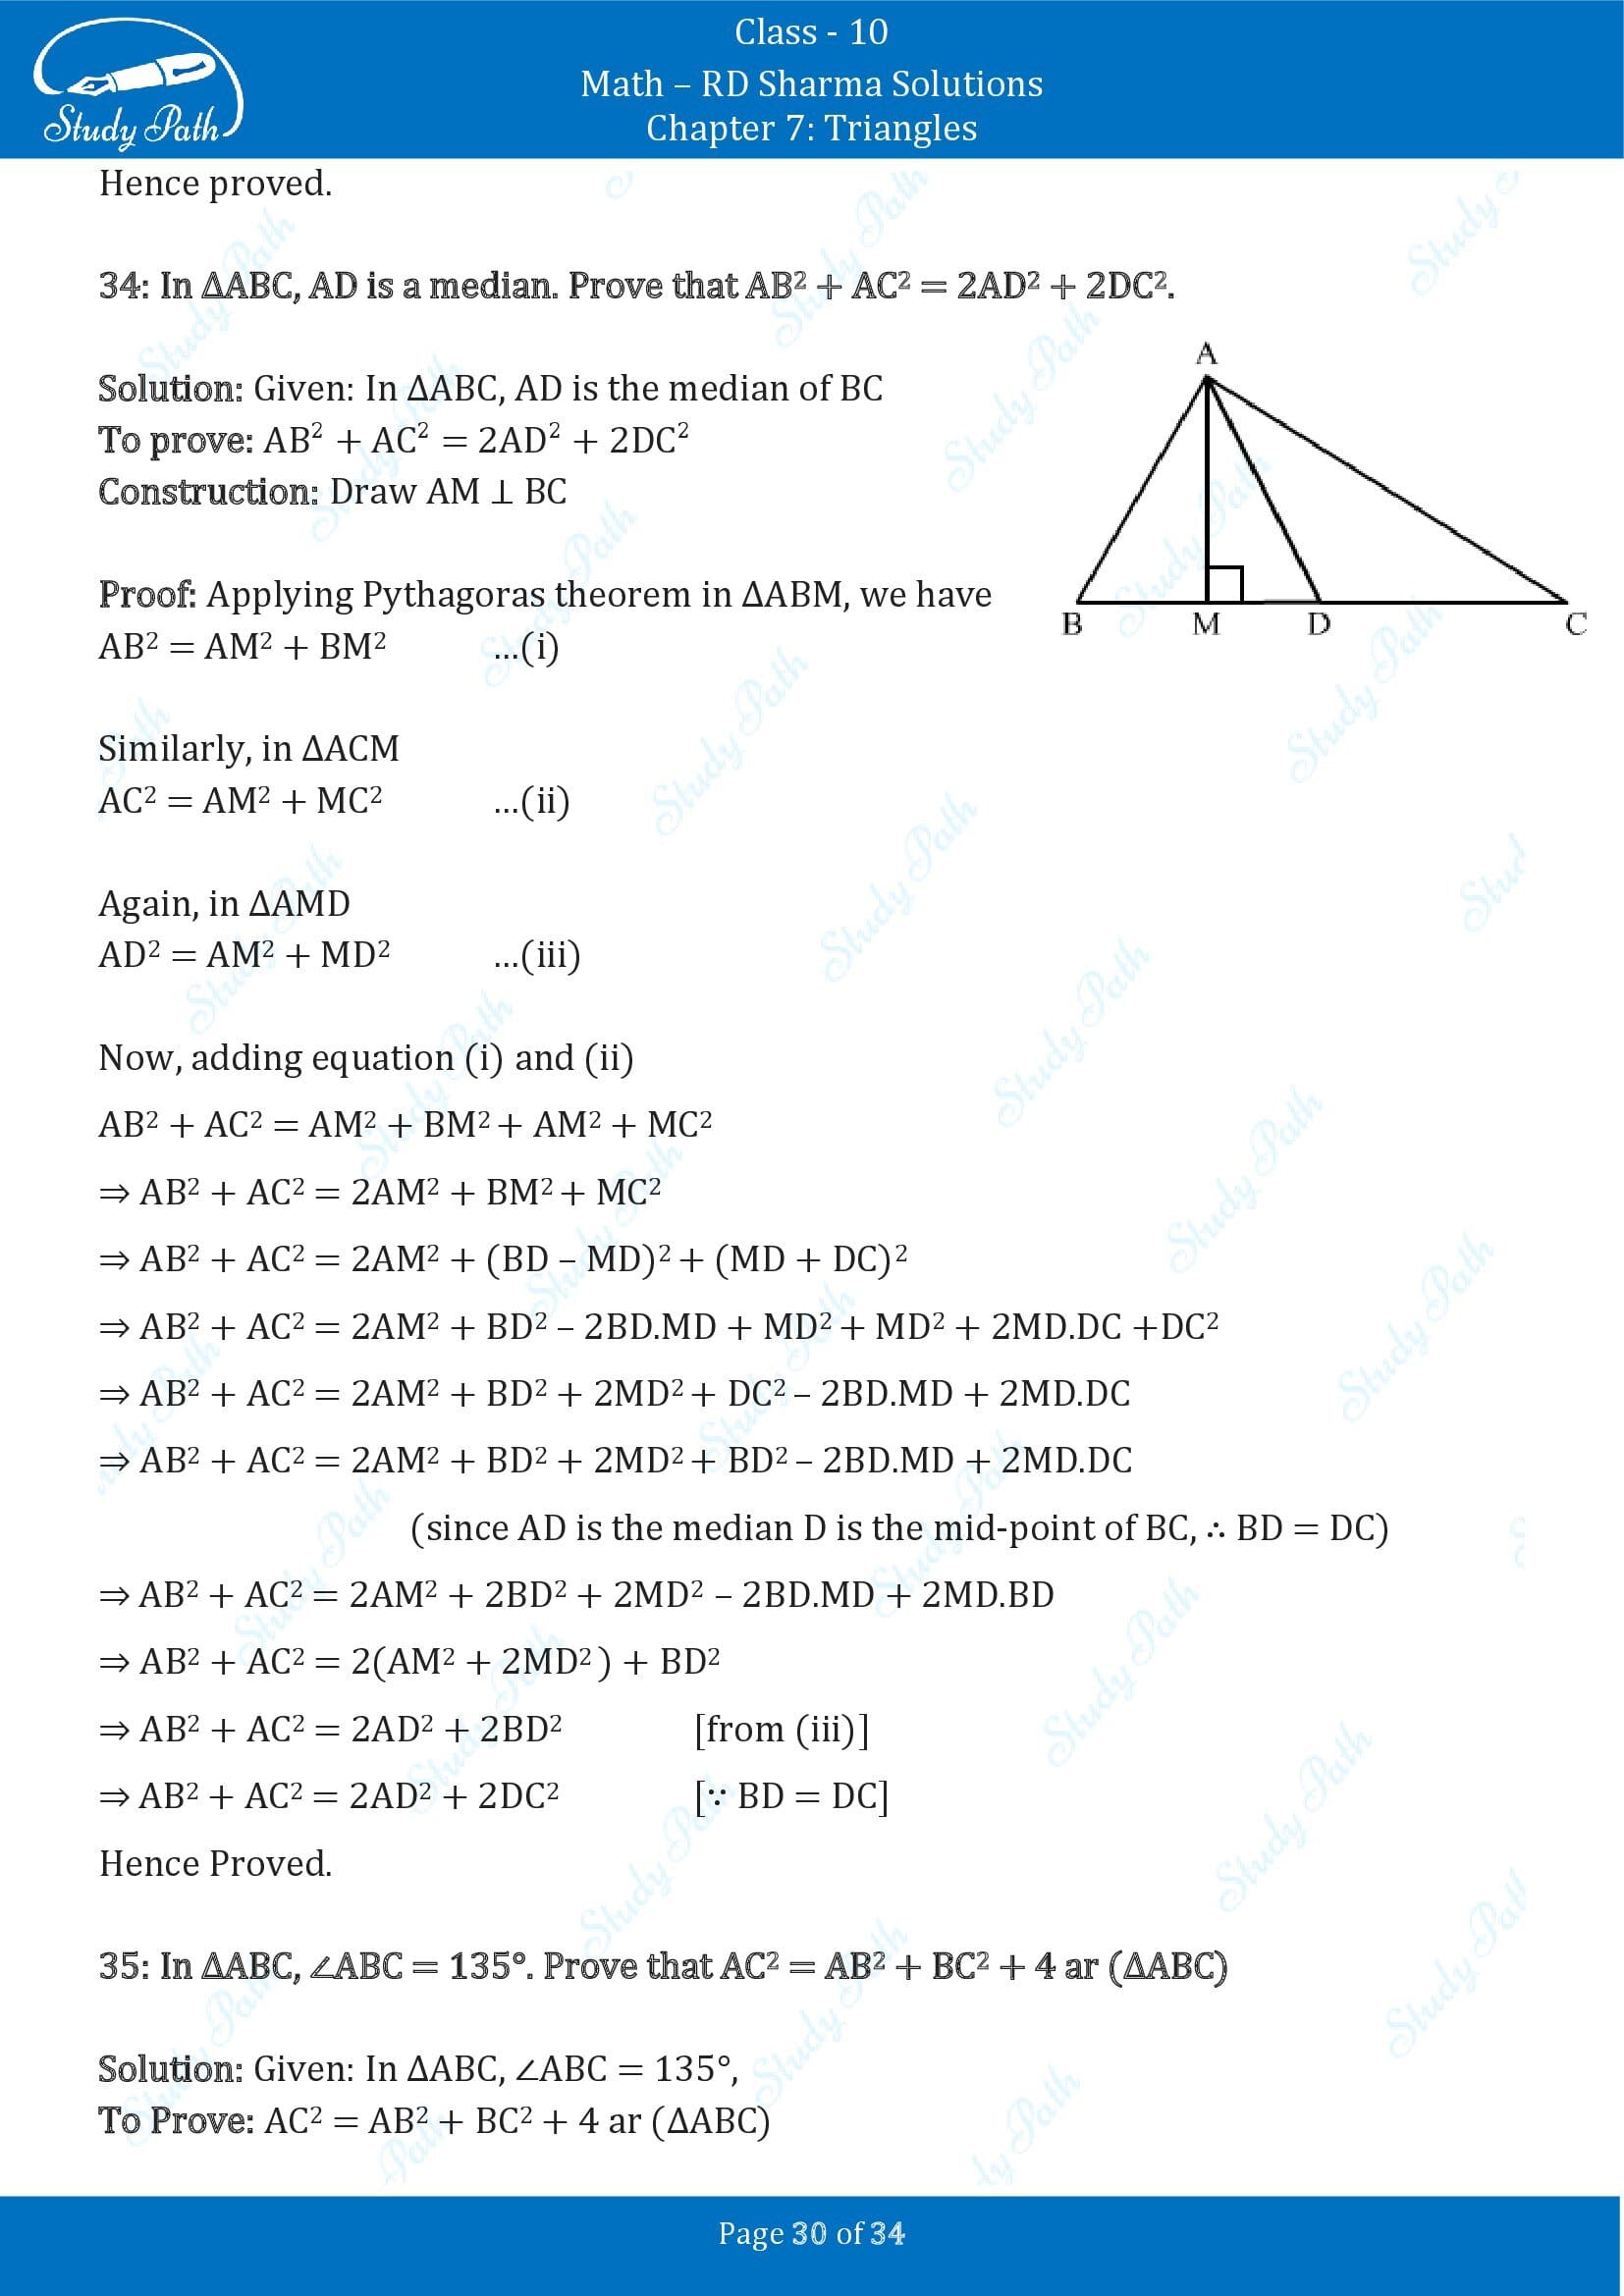 RD Sharma Solutions Class 10 Chapter 7 Triangles Revision